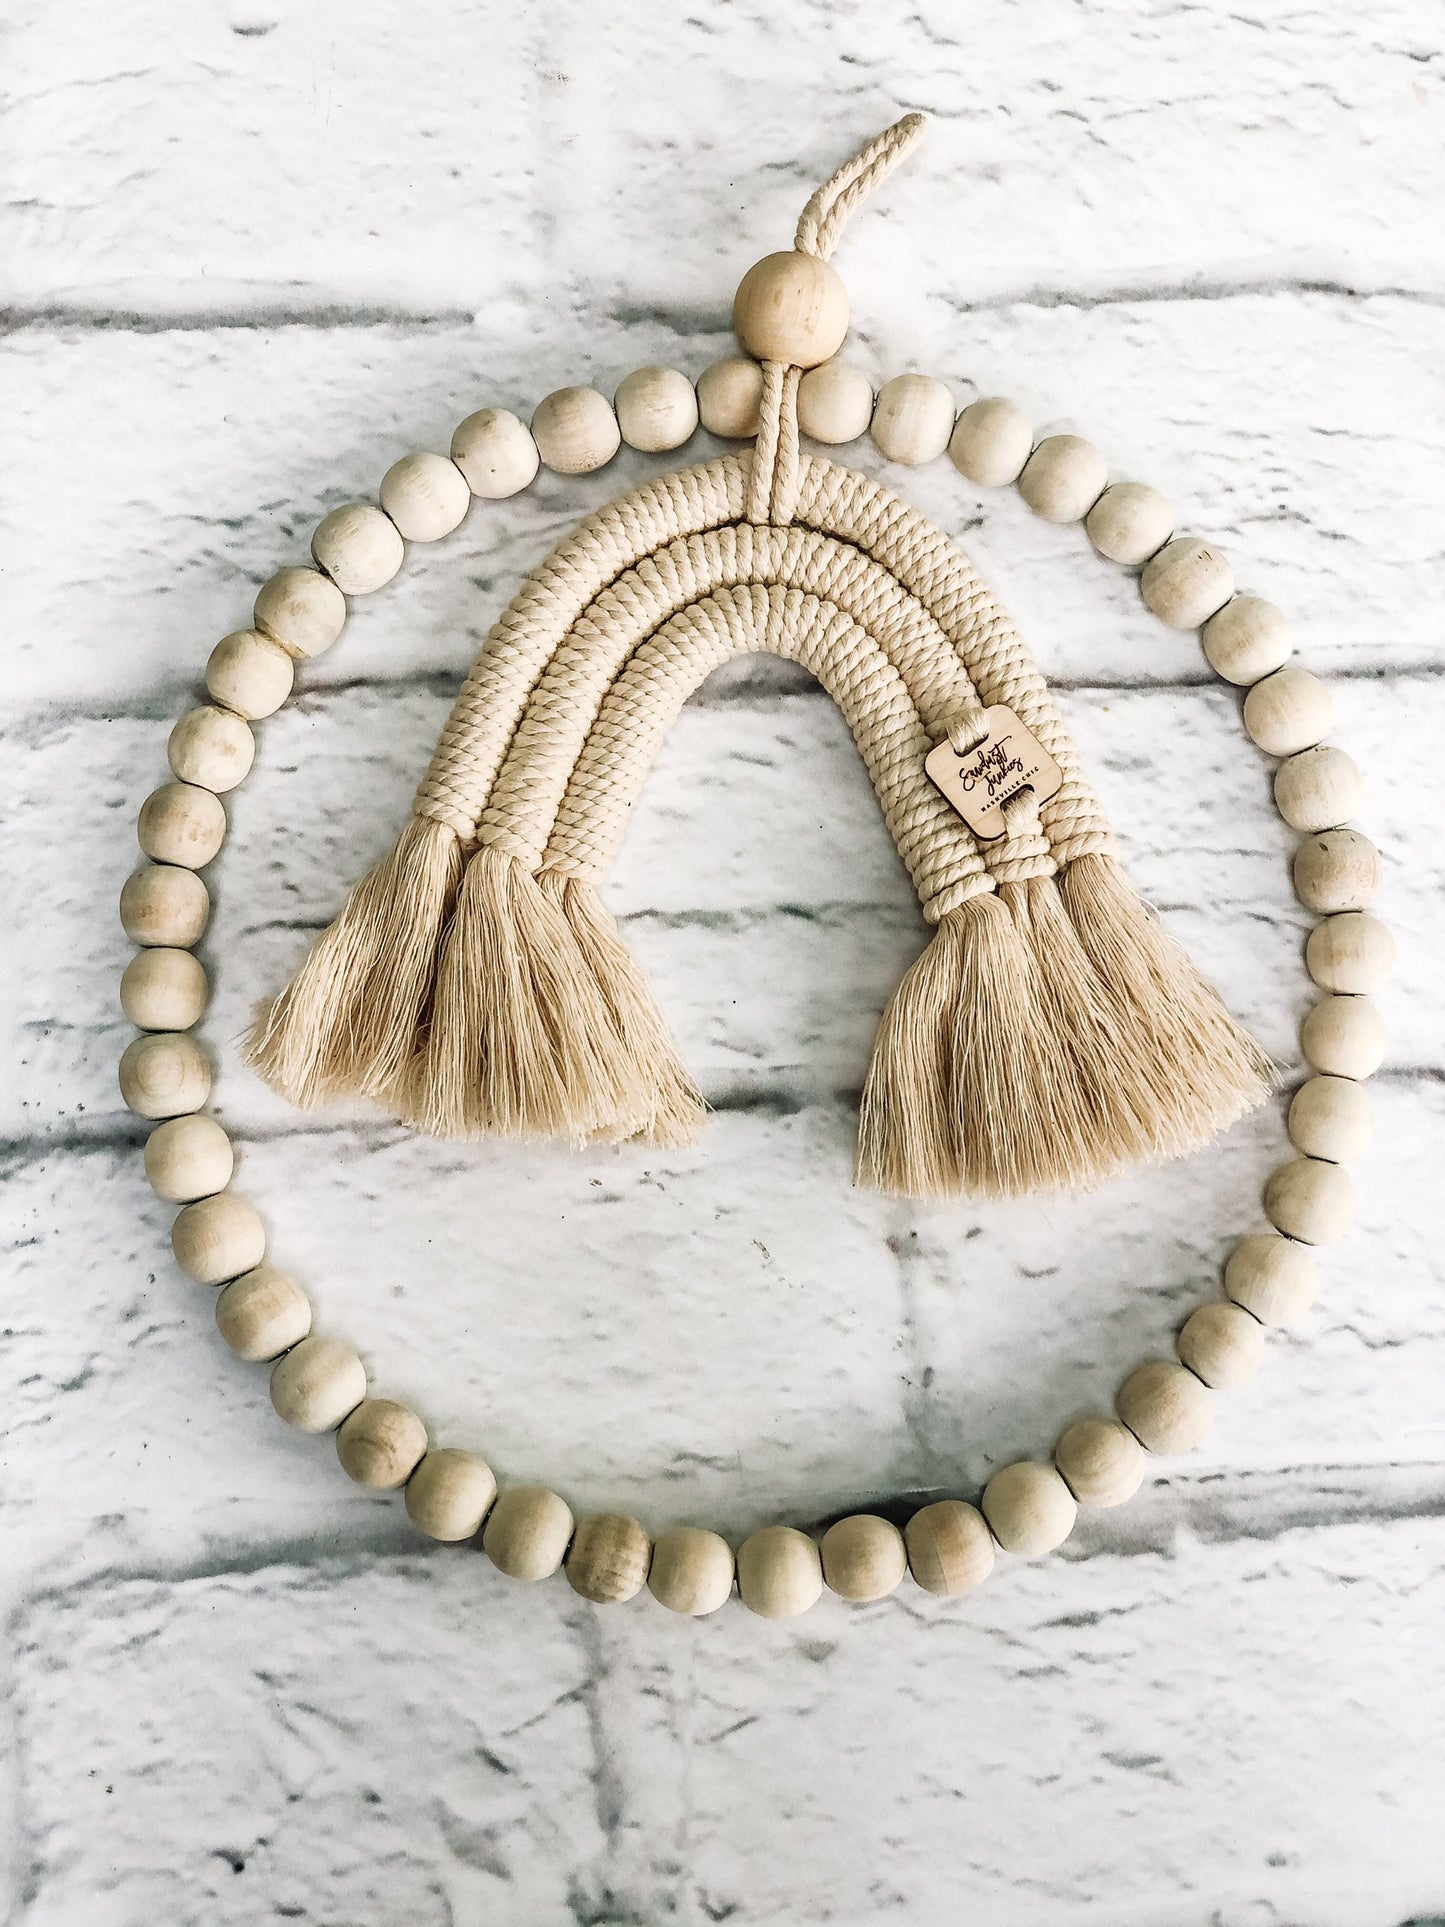 natural macramé rainbow with wooden beads